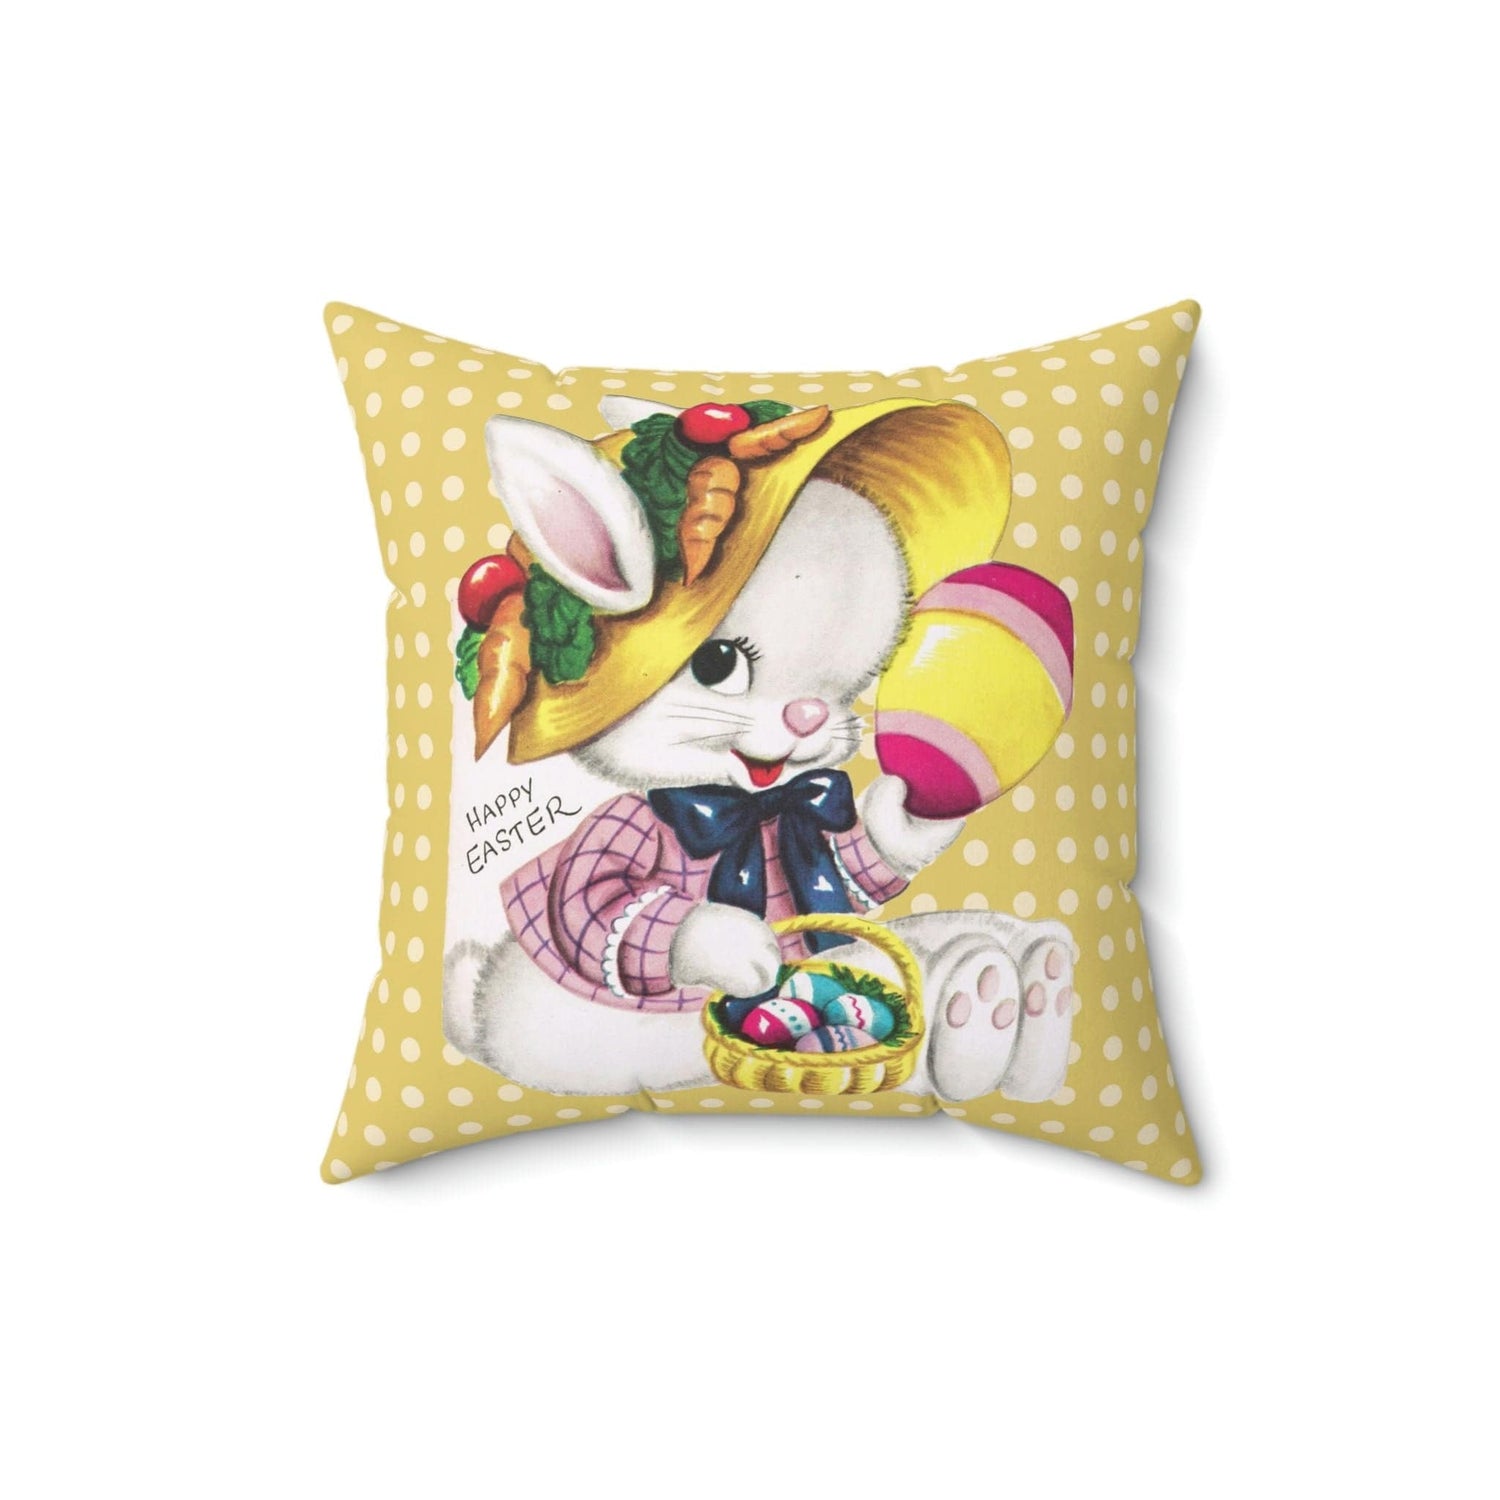 Kate McEnroe New York Vintage Bunny Rabbit Easter Card Inspired Throw Pillow CoverThrow Pillow Covers23977371707192860292